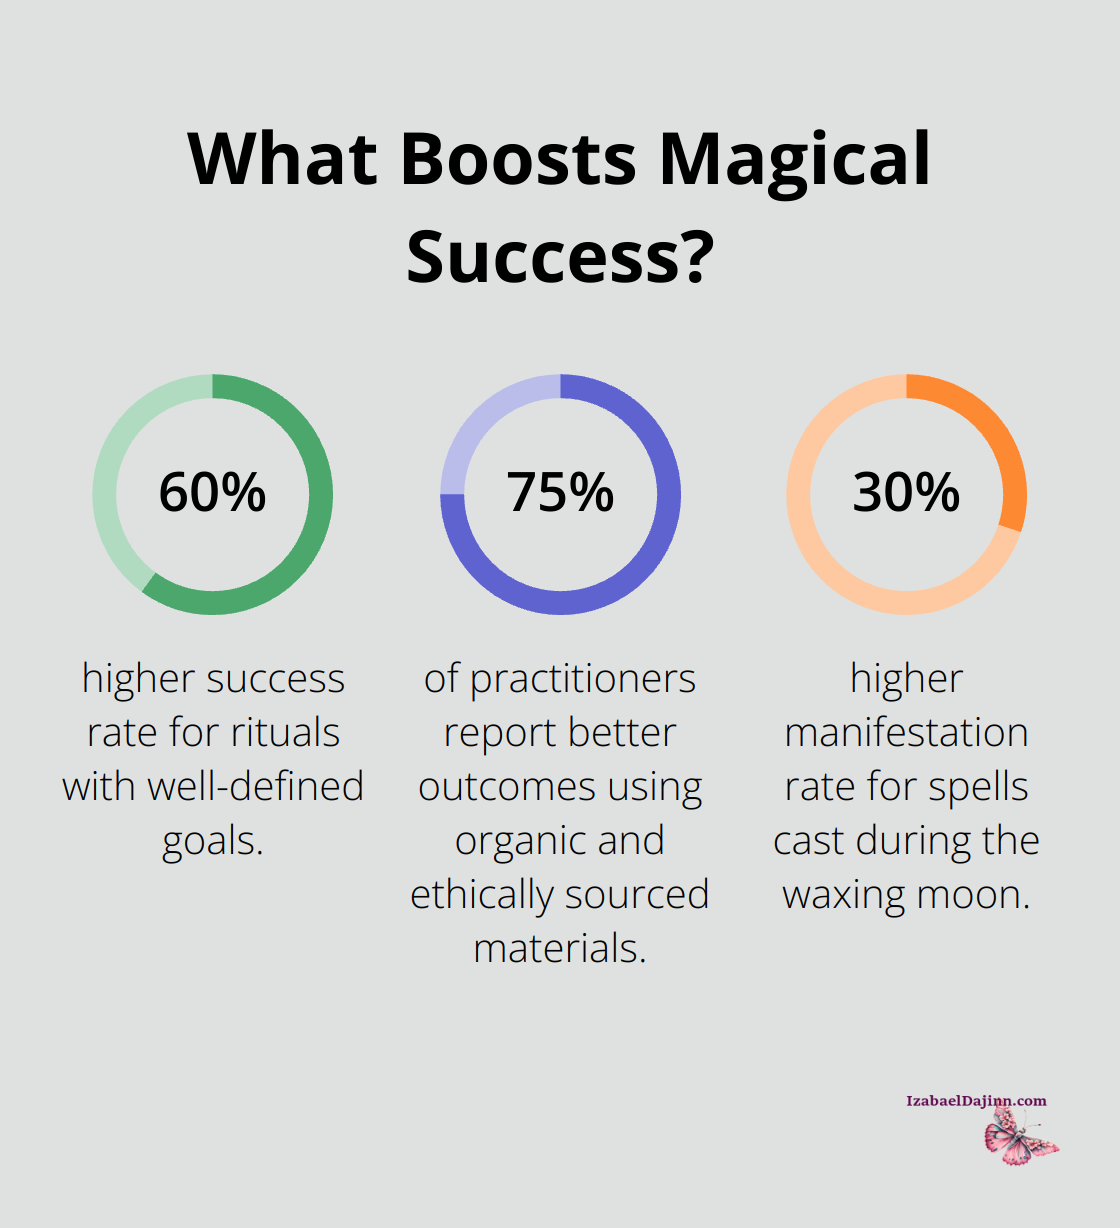 Fact - What Boosts Magical Success?